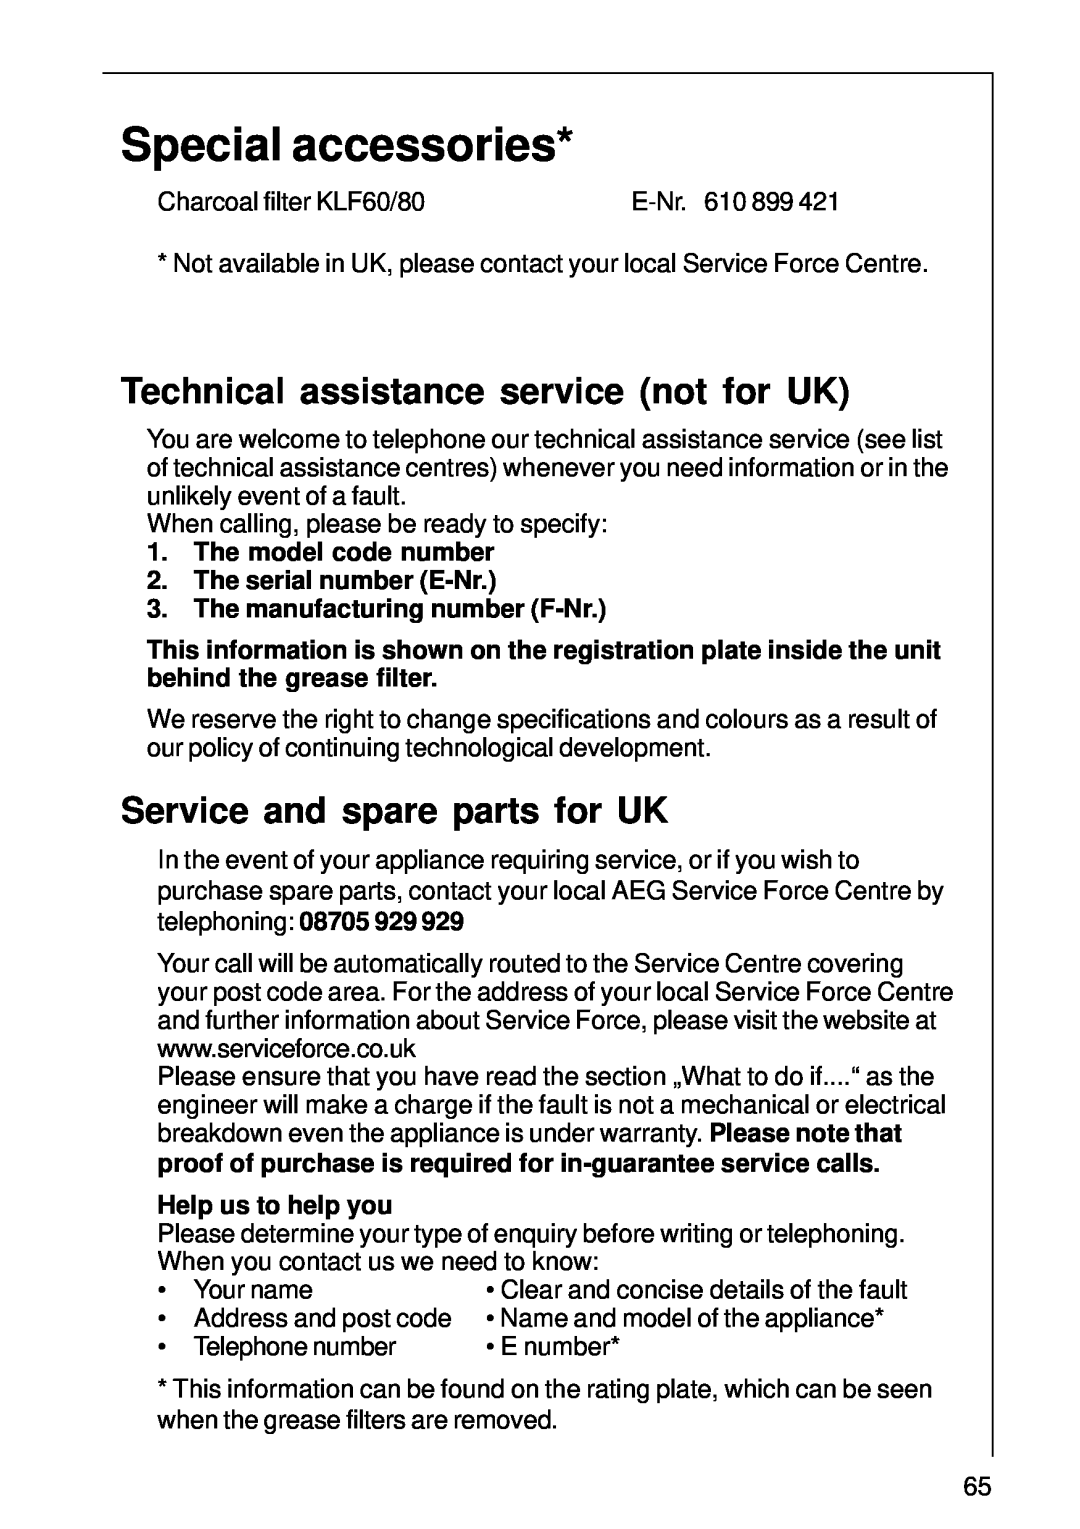 AEG DE 3160 Special accessories, Technical assistance service not for UK, Service and spare parts for UK 